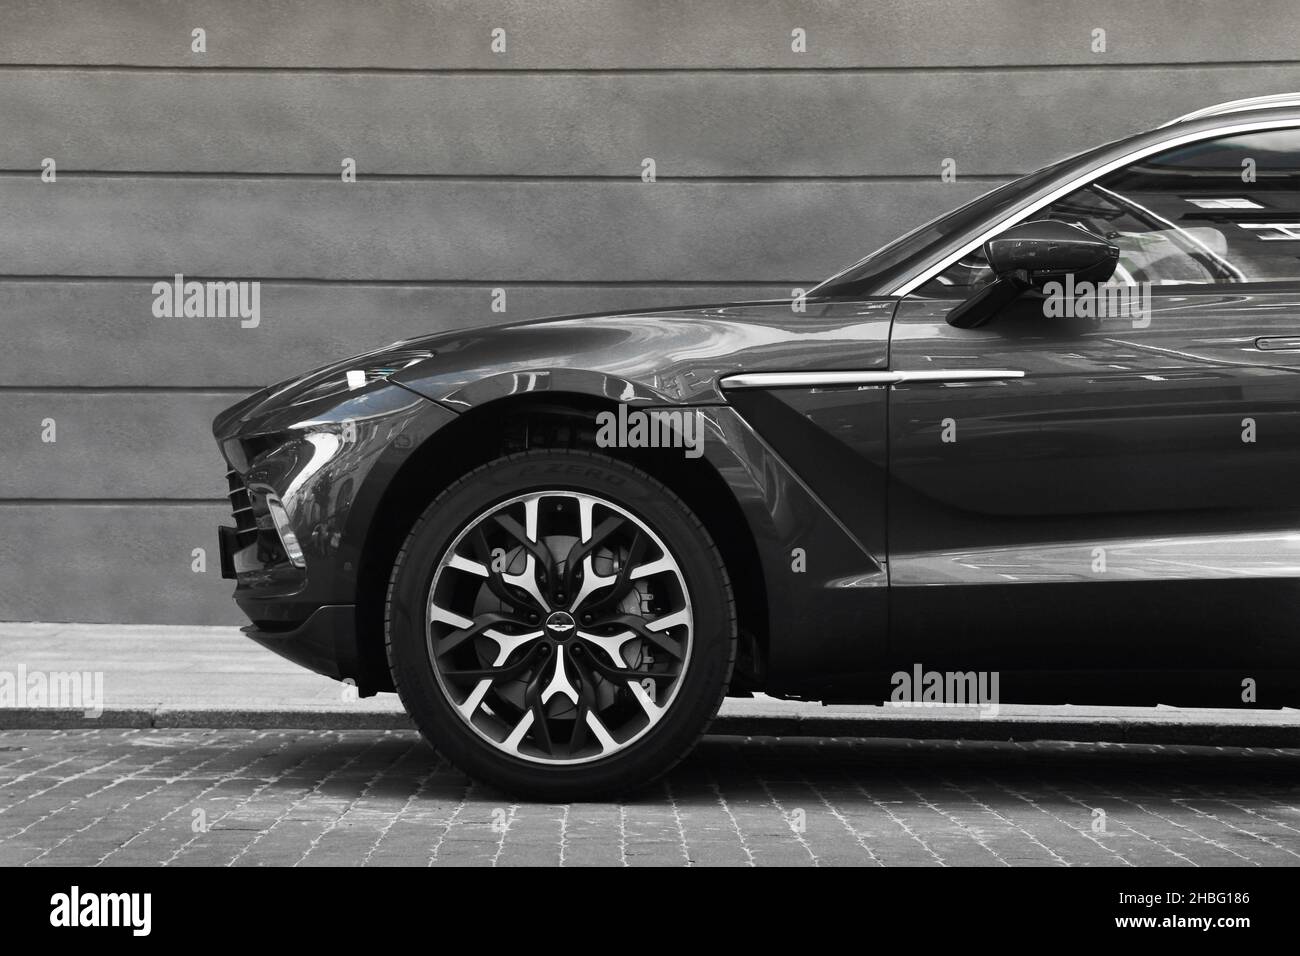 Kiev, Ukraine - May 22, 2021: Aston Martin DBX gray luxury super SUV against the background of a gray wall. Luxury British SUV in the city Stock Photo